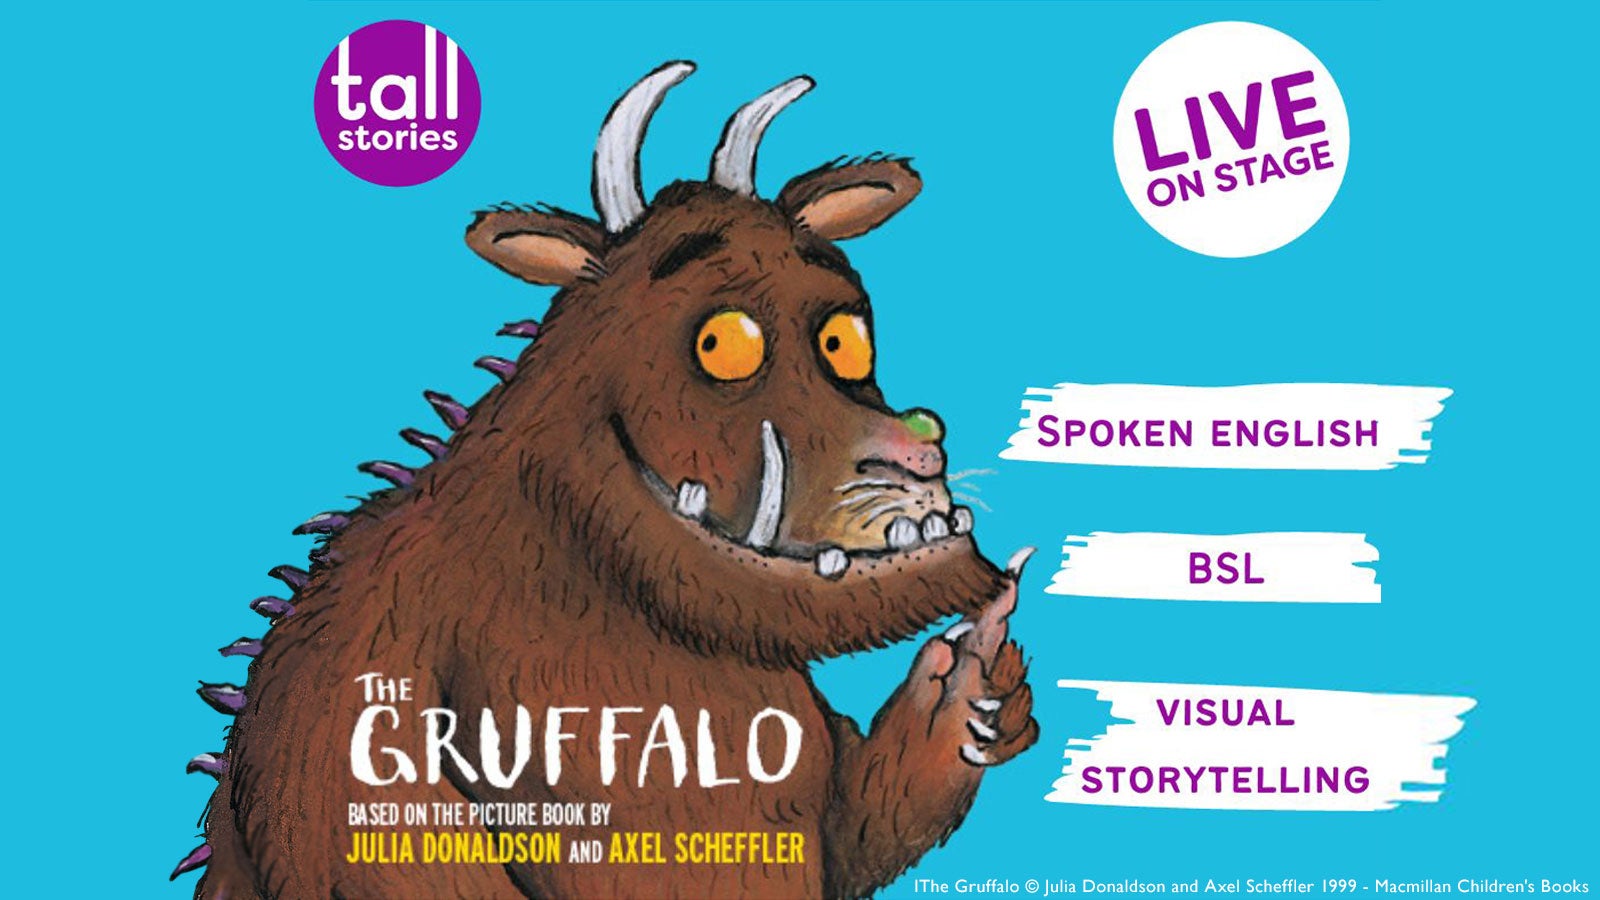 A poster for The Gruffalo Live on Stage with banners highlighting it will be performed in spoken English, BSL, and with visual storytelling. 